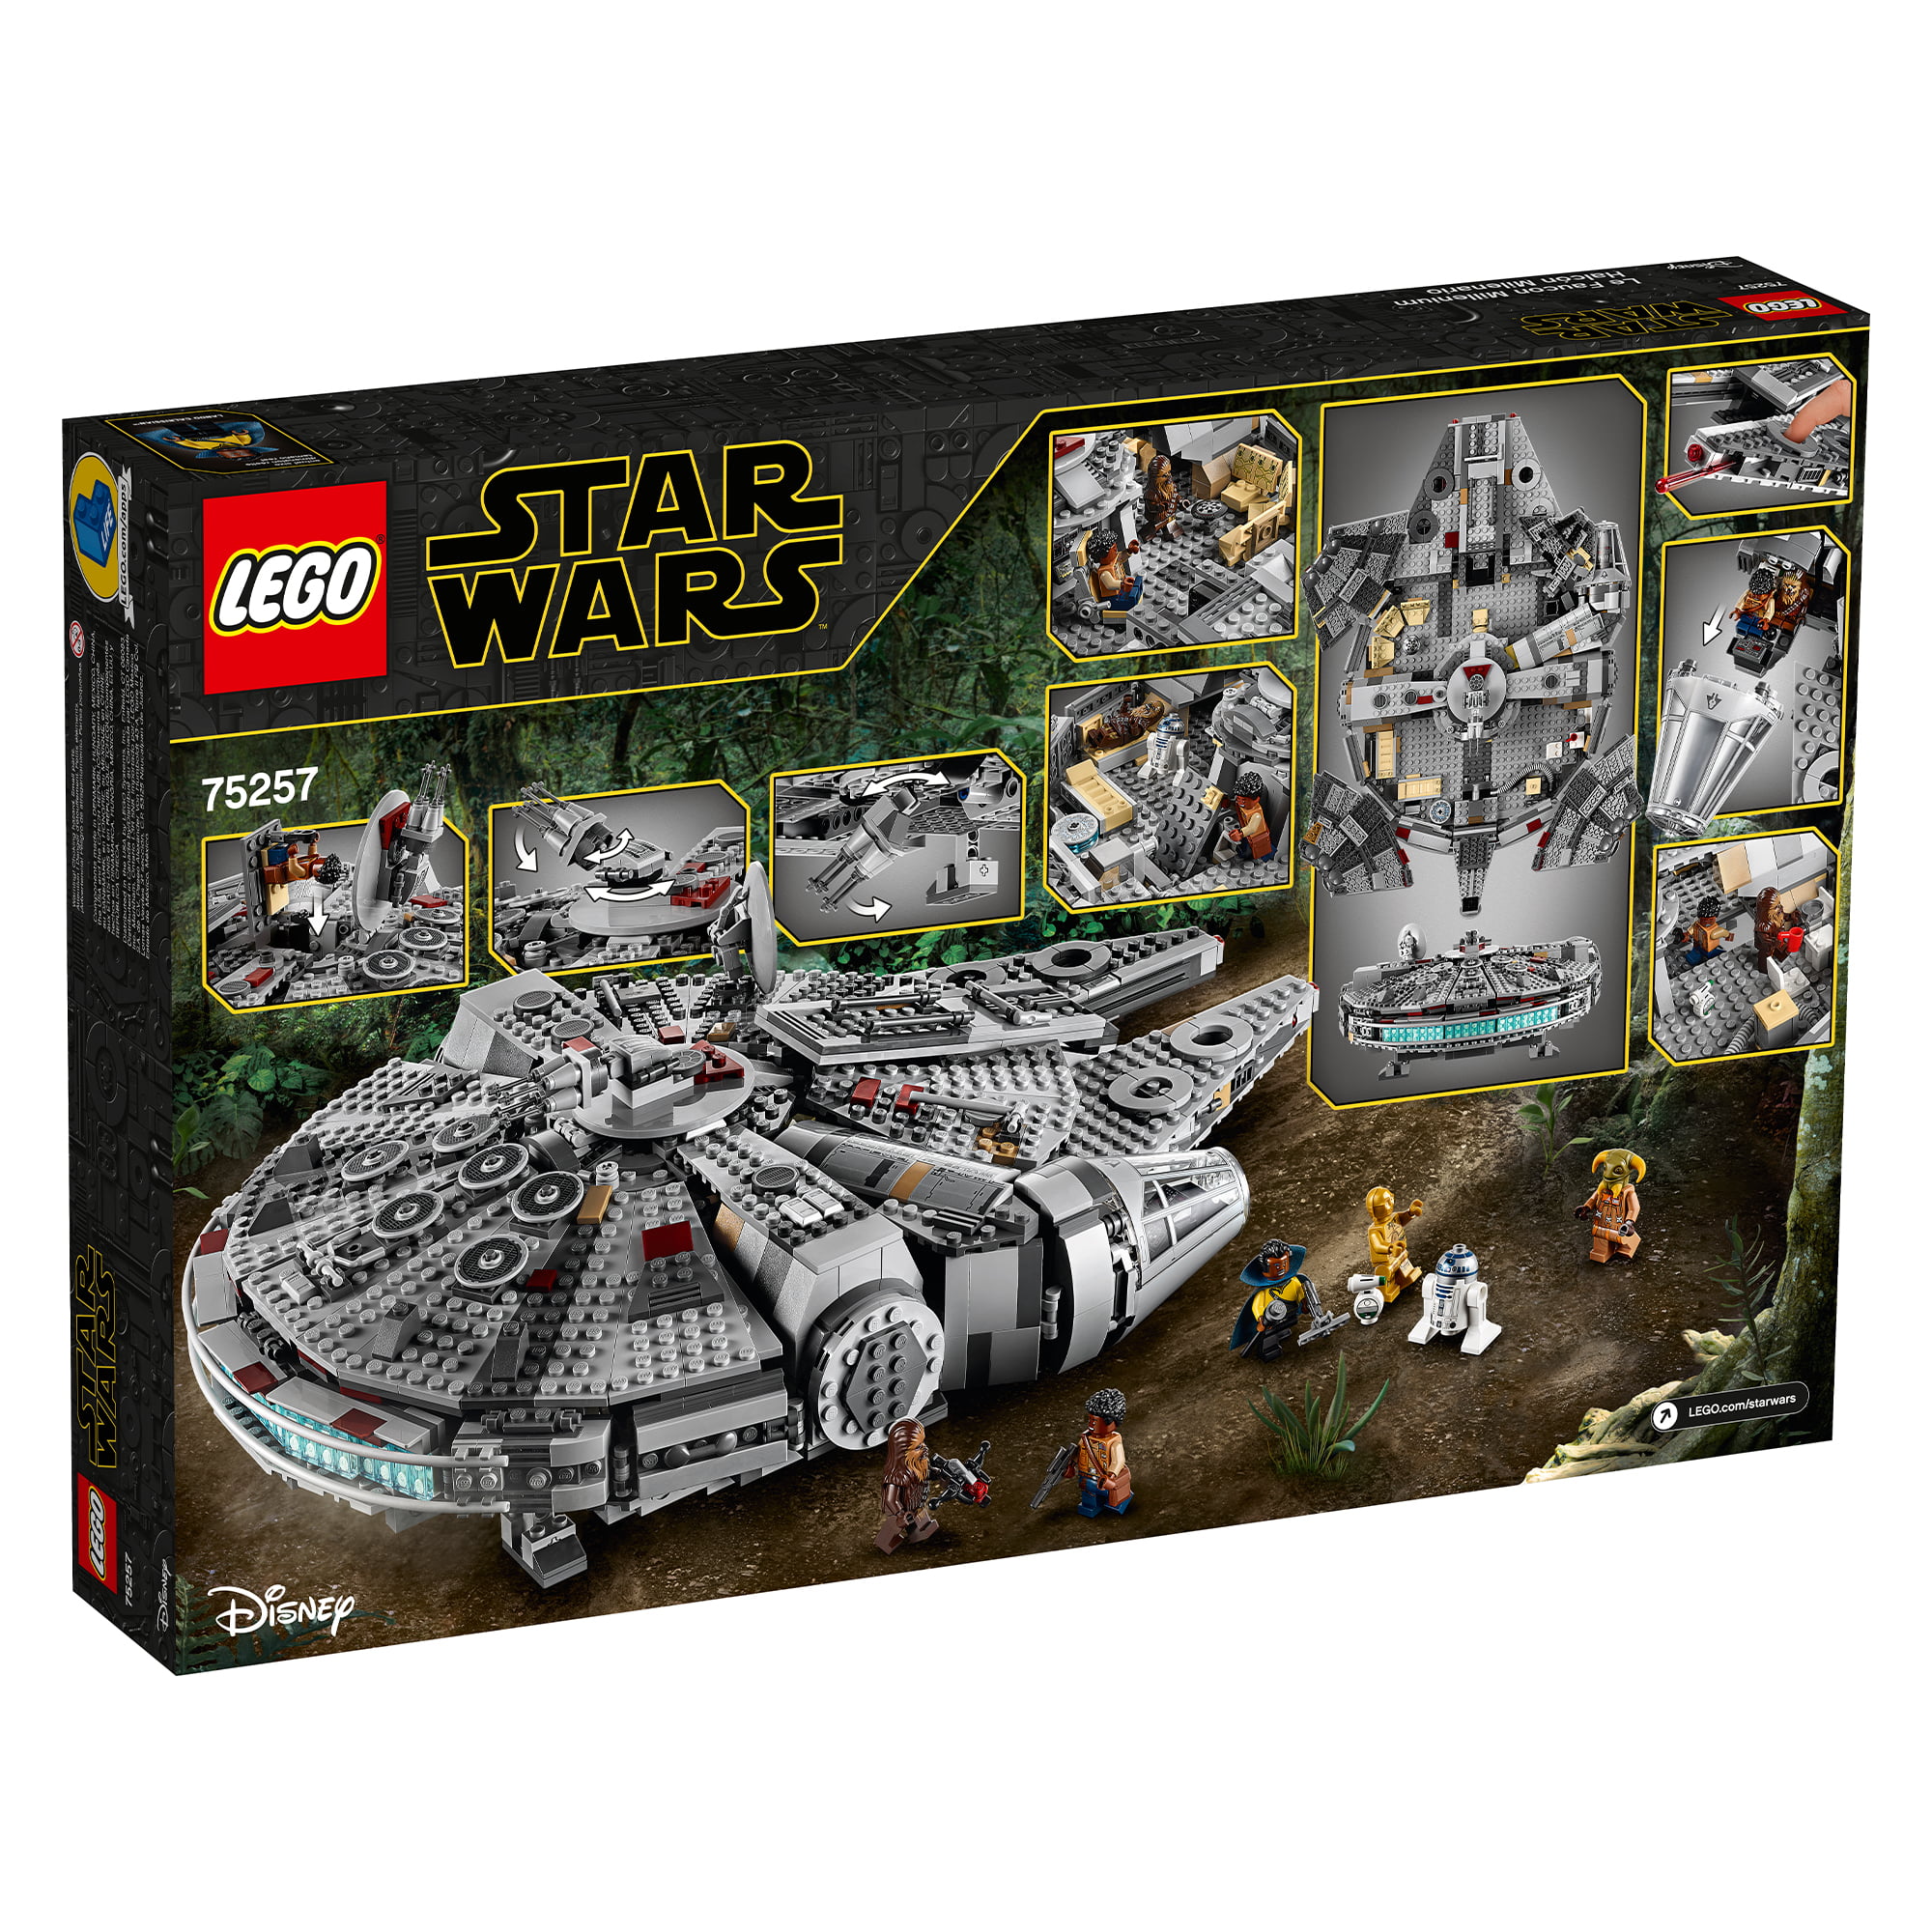 LEGO Star Wars: The Rise of Skywalker Millennium Falcon 75257 Starship Kit and Minifigures (1,351 Pieces) -